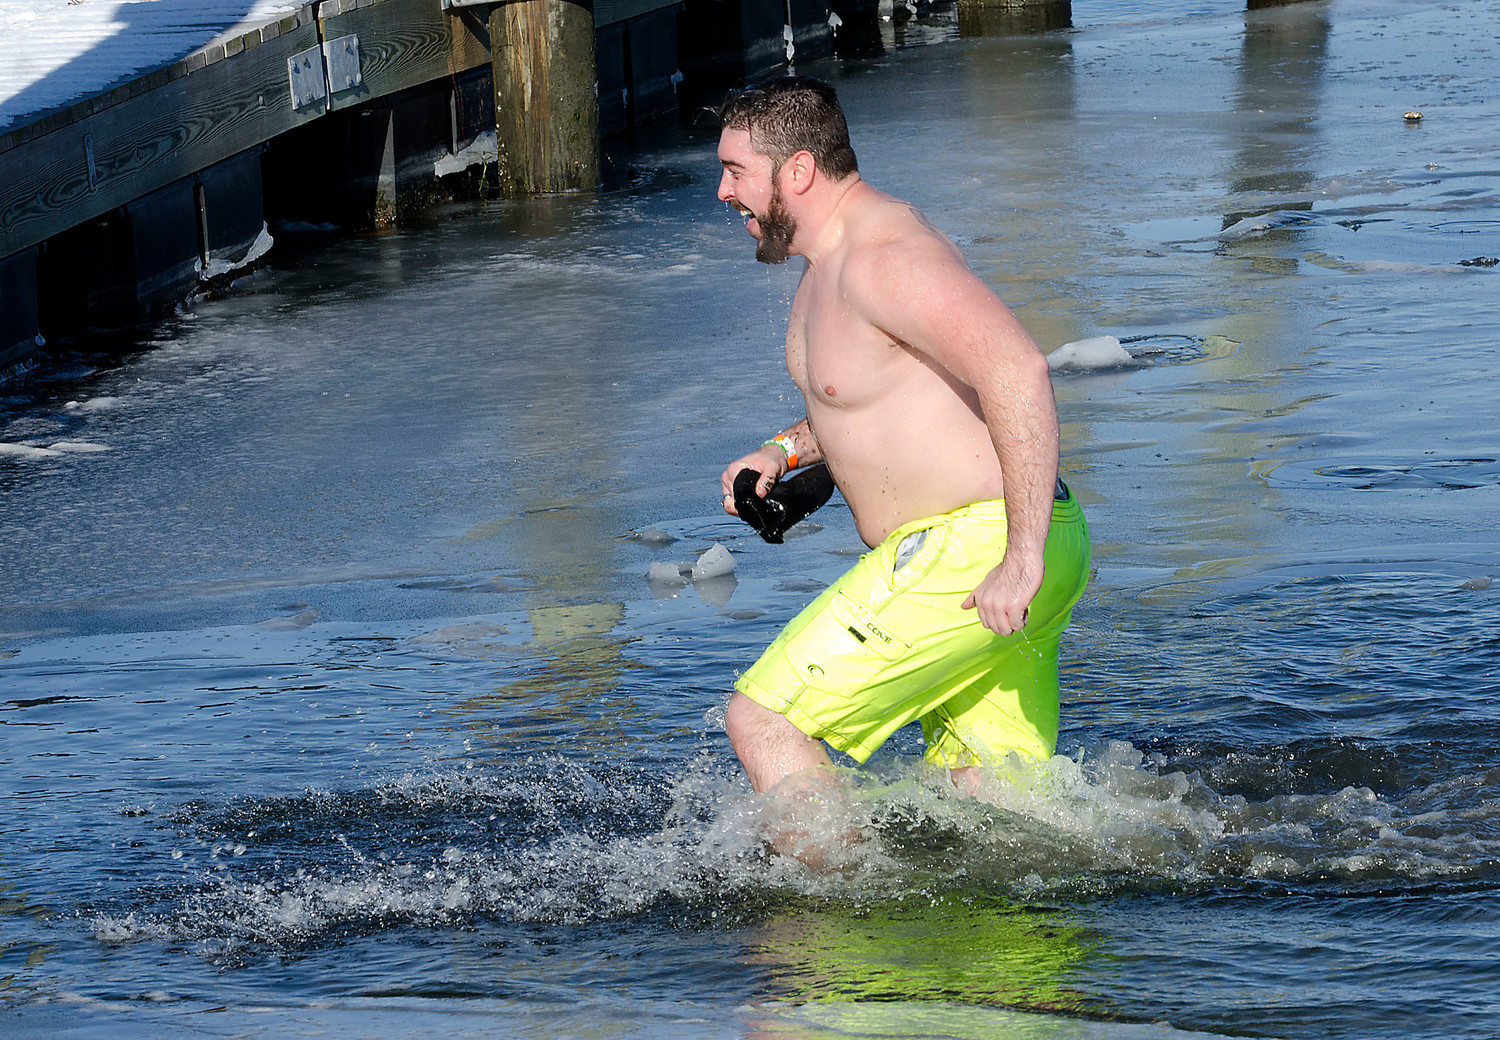 After his plunge, he quickly ran back to the dock to get a towel.